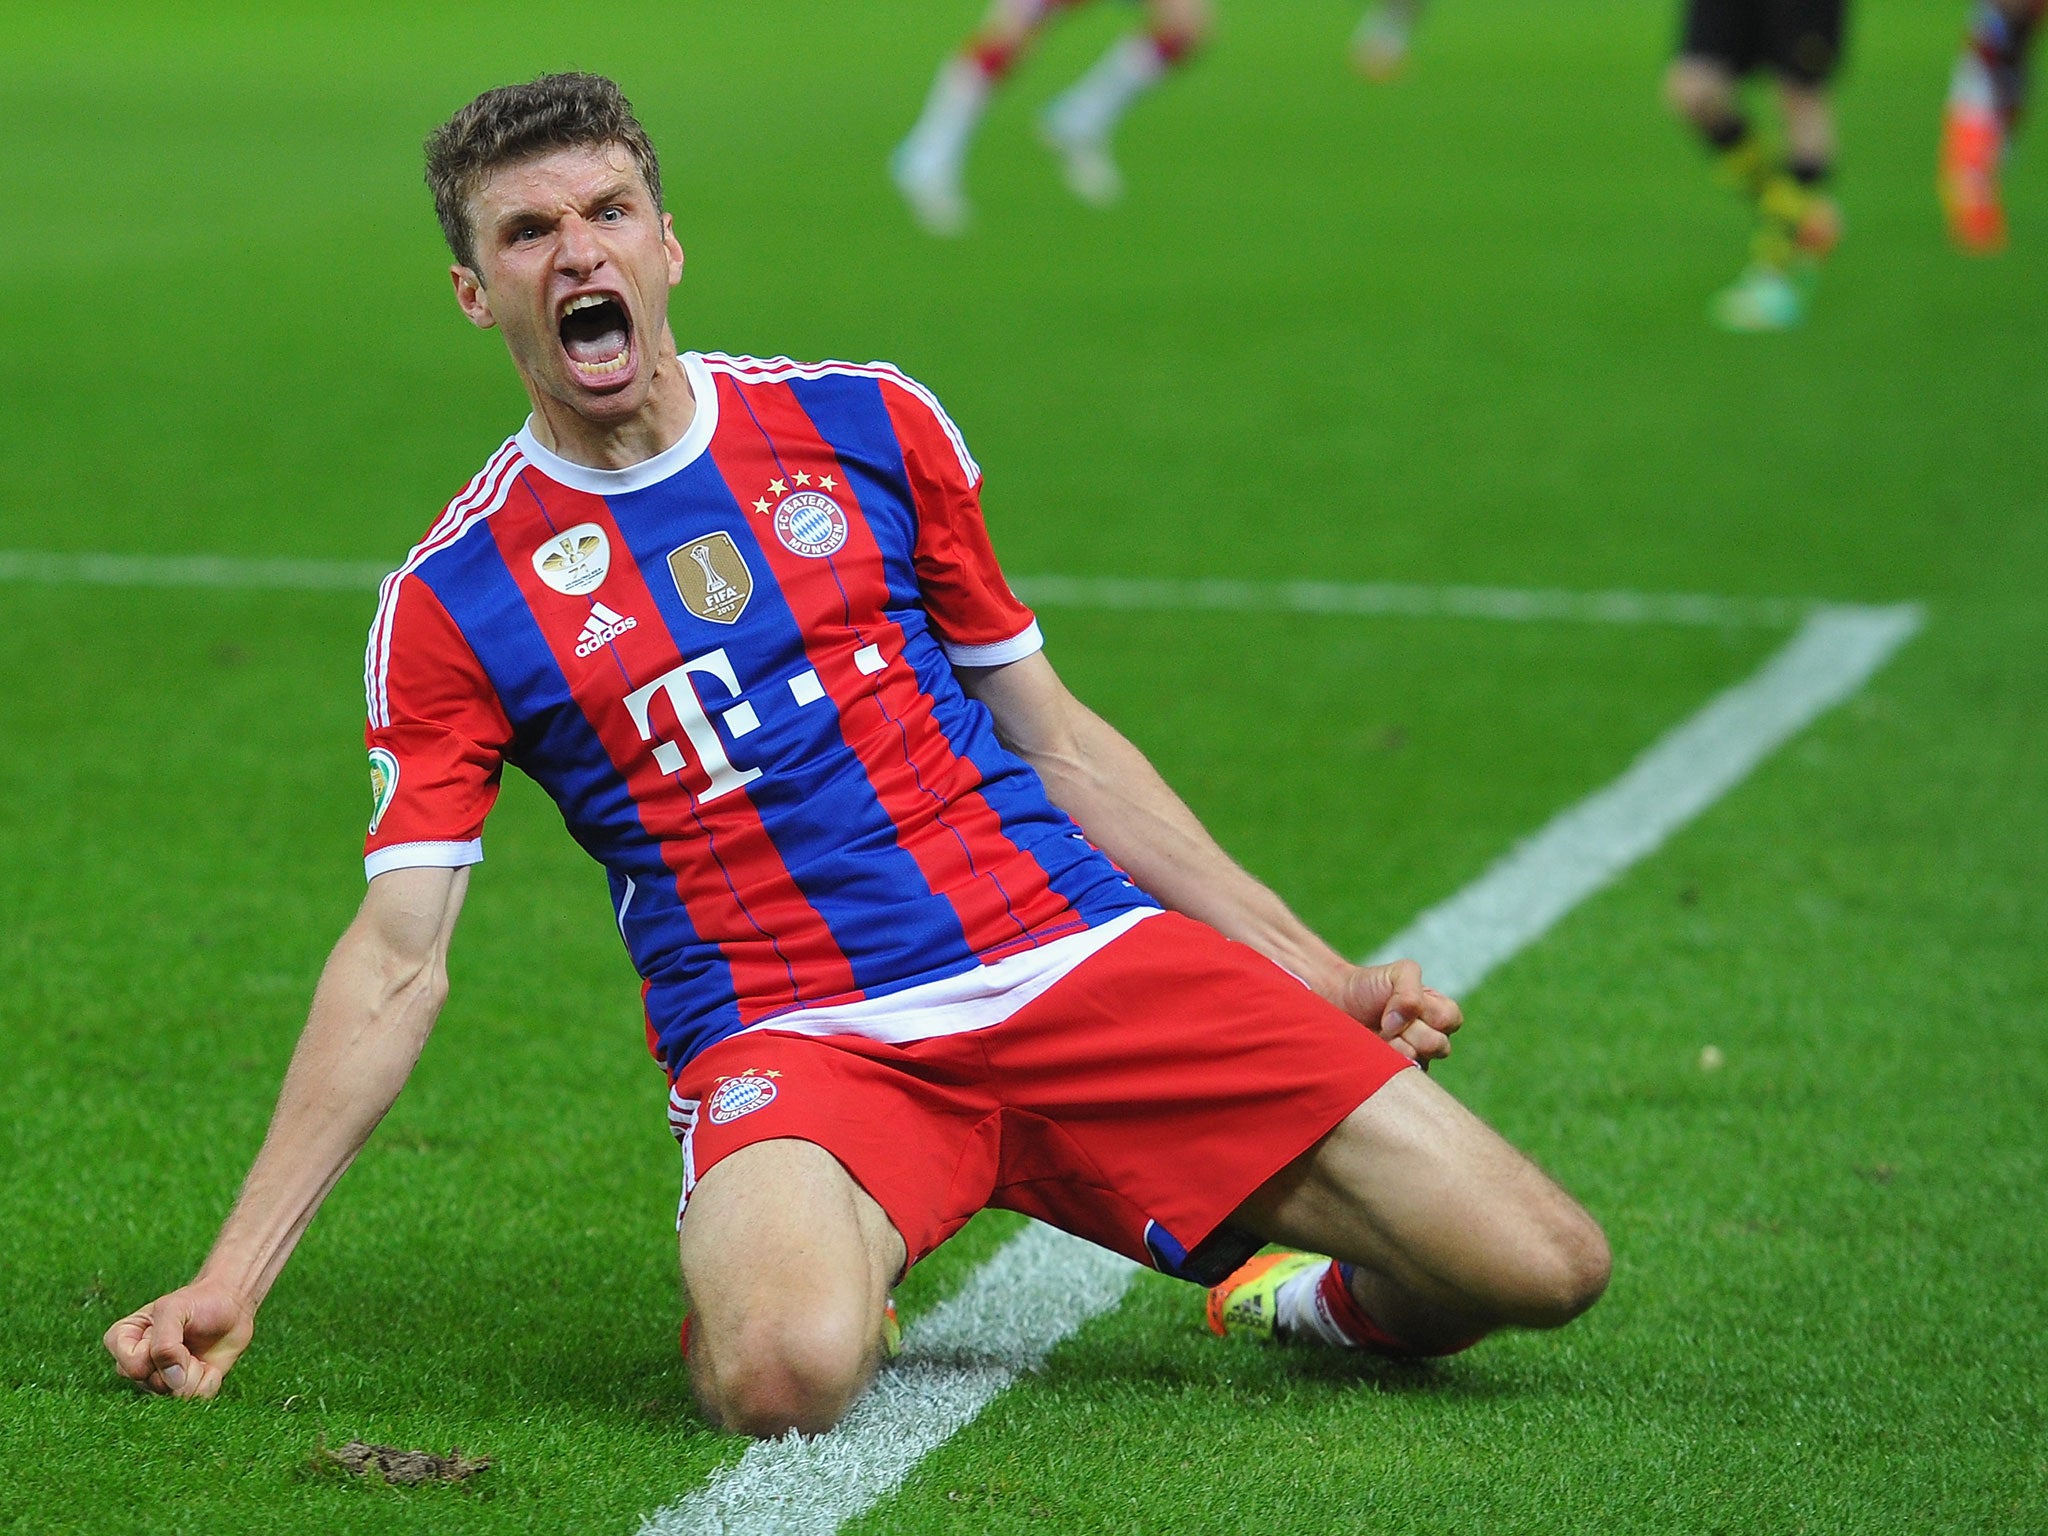 Thomas Muller has agreed a two-year contract extension with Bayern Munich